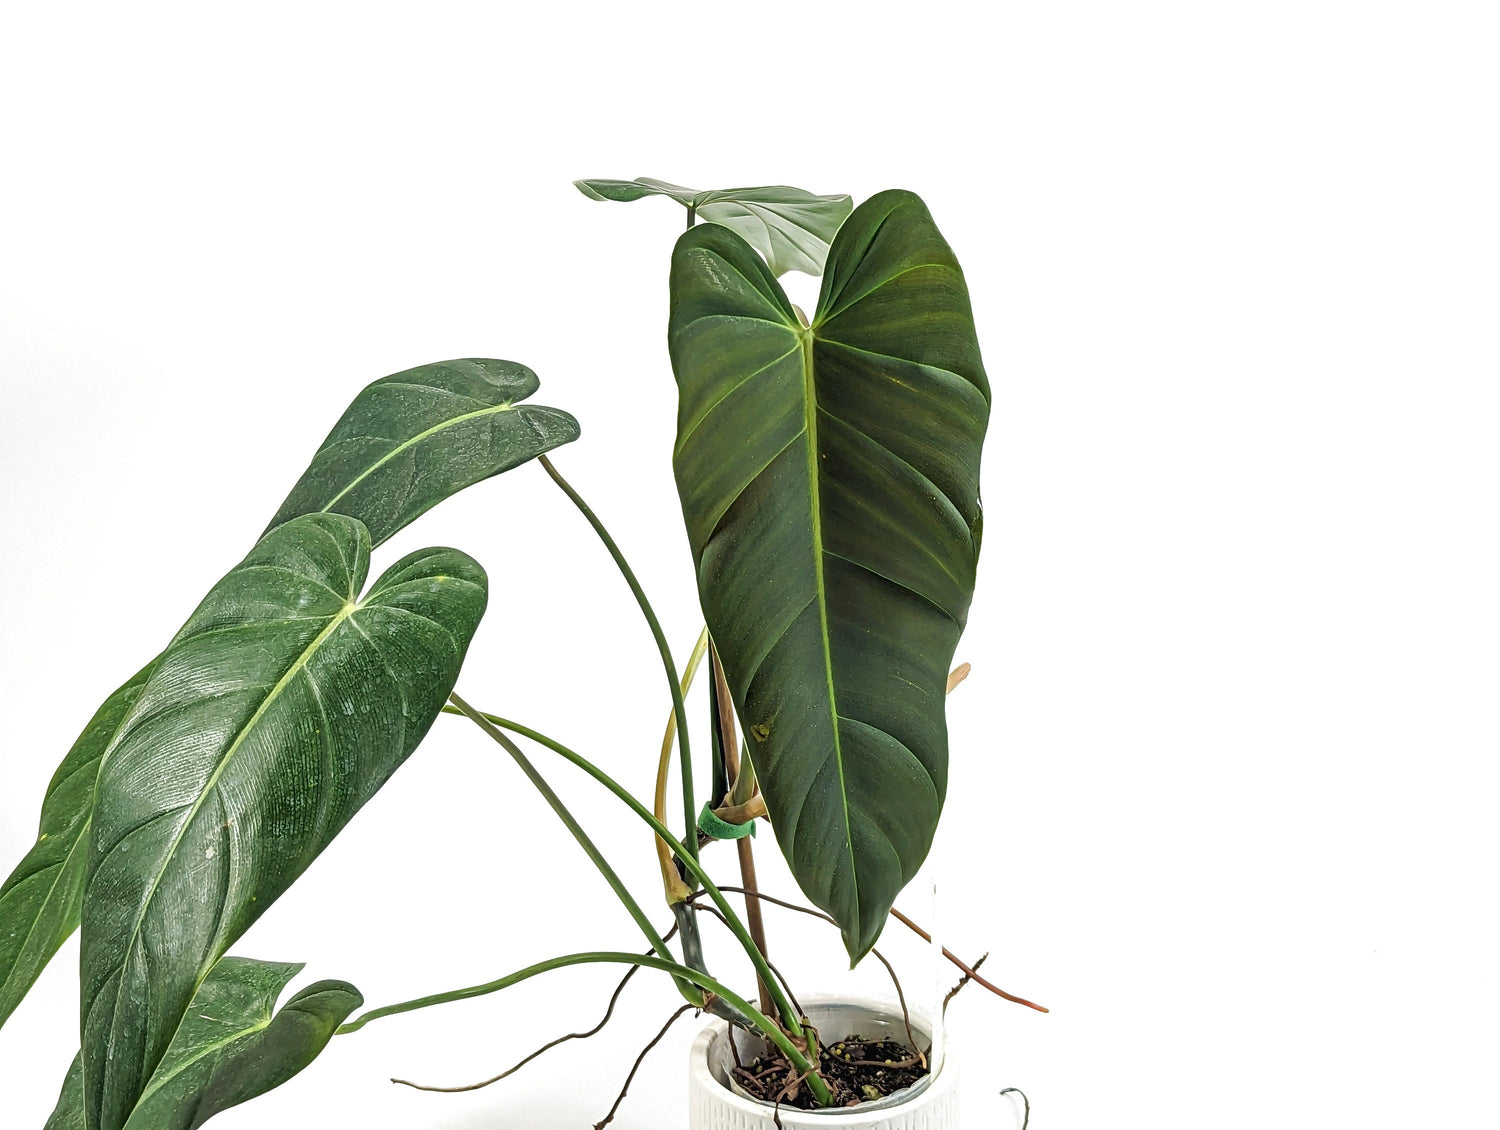 Philodendron Esmeralda Spirit New Philodendron Hybrid in 4 inch pot - Exact Plant 